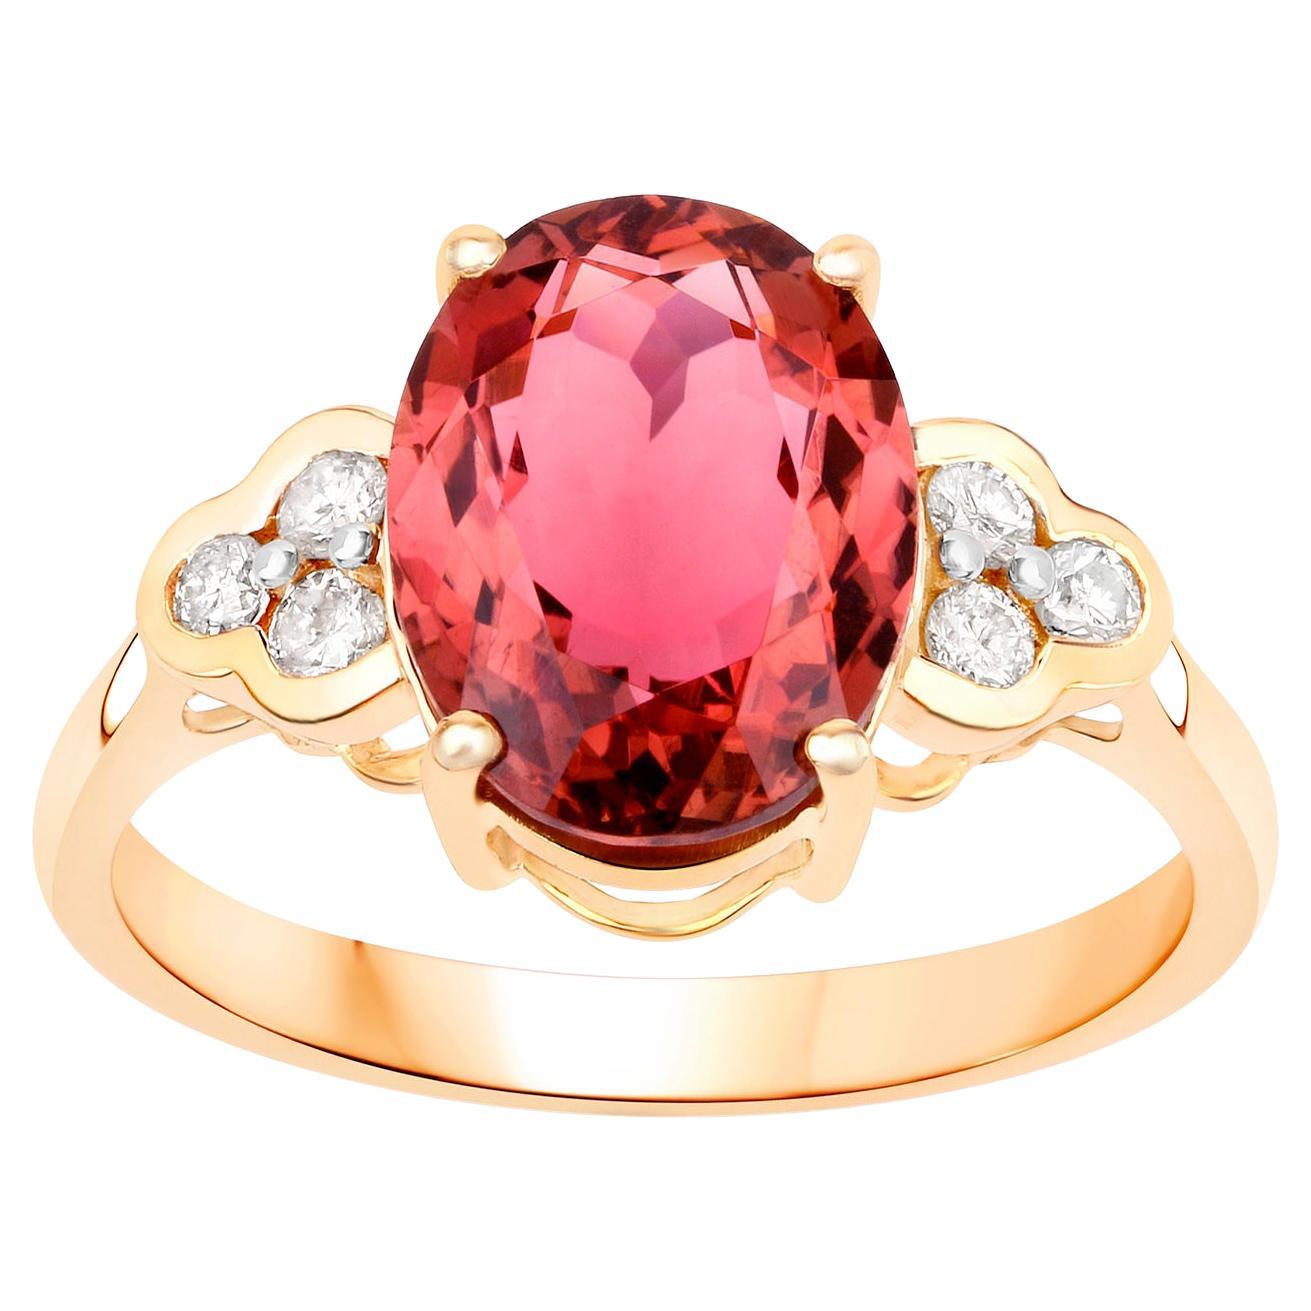 Raspberry Pink Tourmaline Cocktail Ring With Diamonds Total 3.30 Carats 14K Gold For Sale